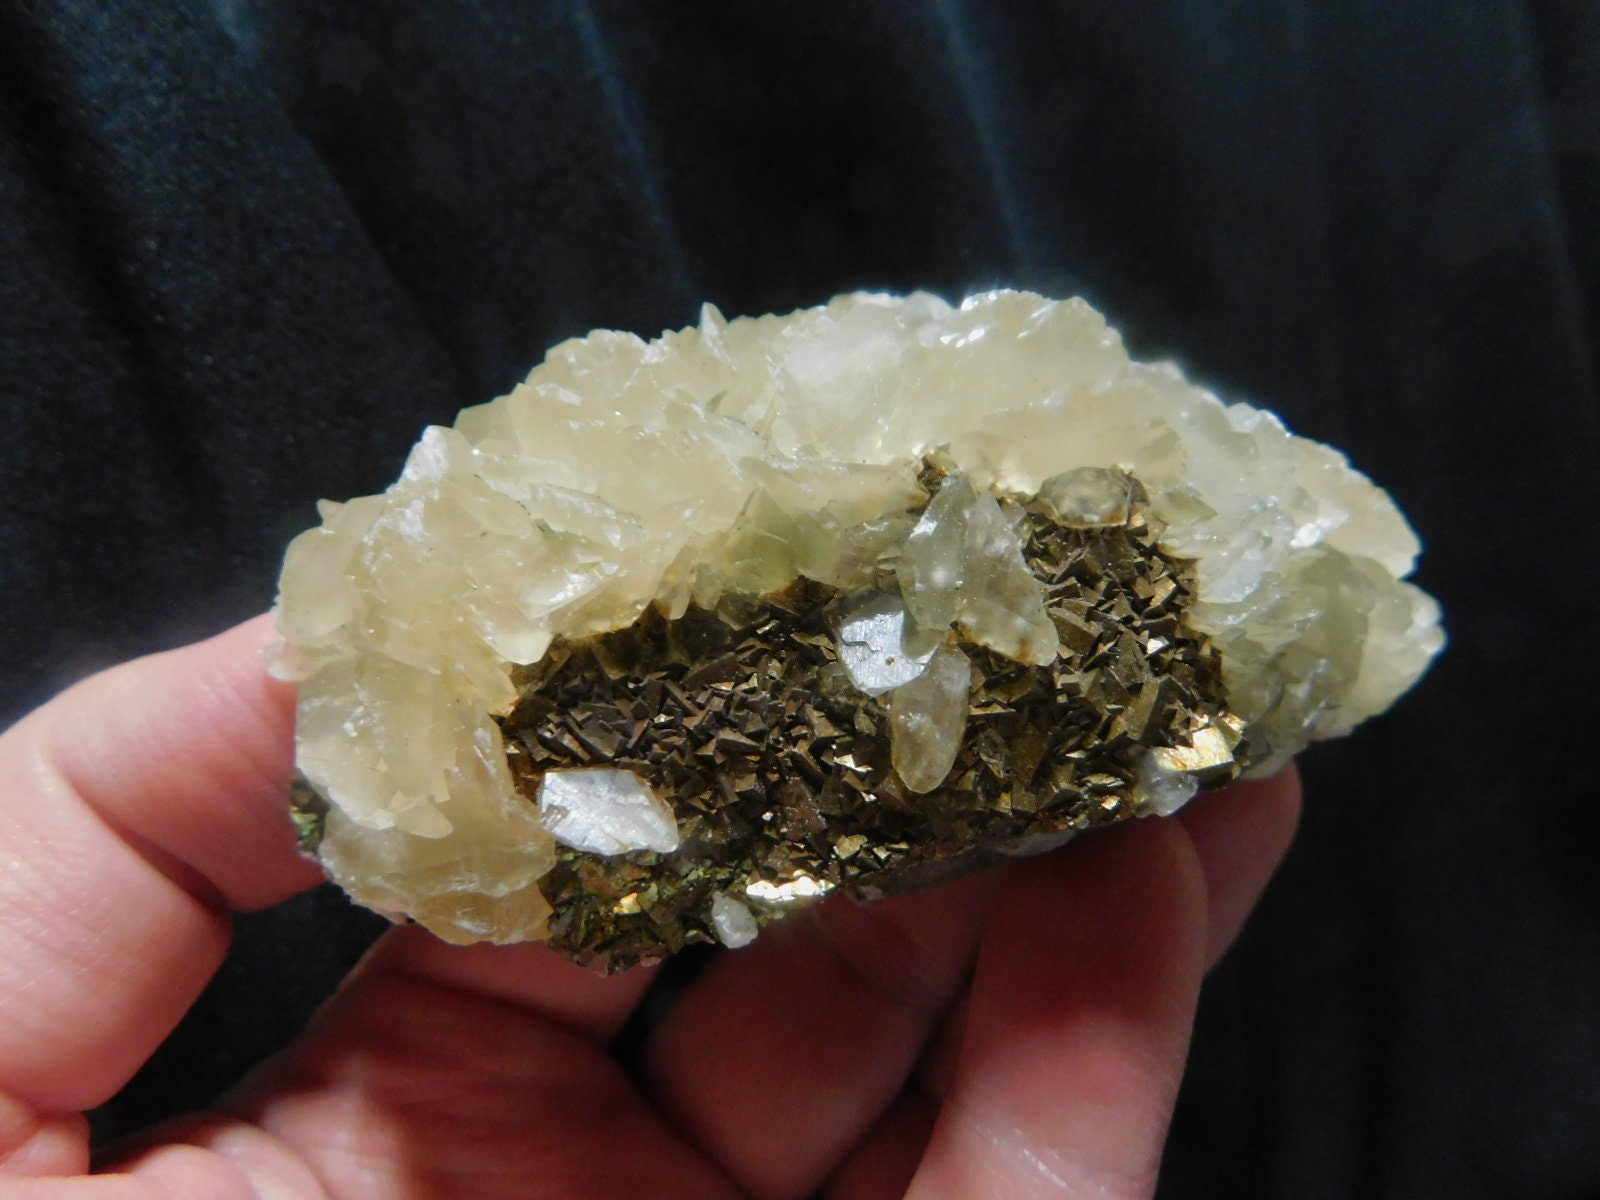 Stunning Chalcopyrite Gift Mineral Pagan. Healing Crystal Wiccan specimen cluster Mangano Calcite Quartz formation